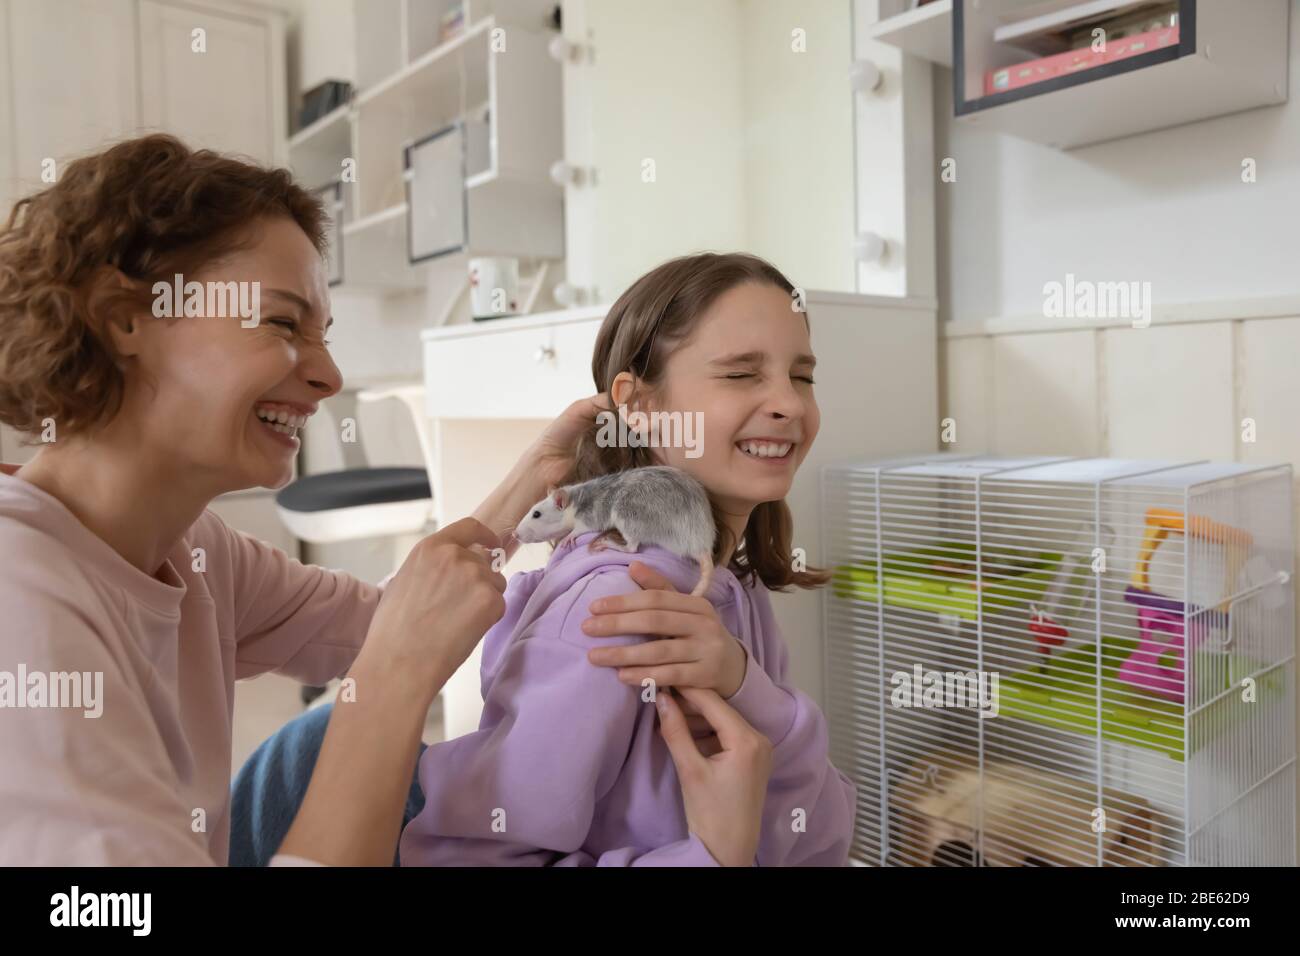 Cheerful mom and teenage daughter laughing playing with rat pet Stock Photo